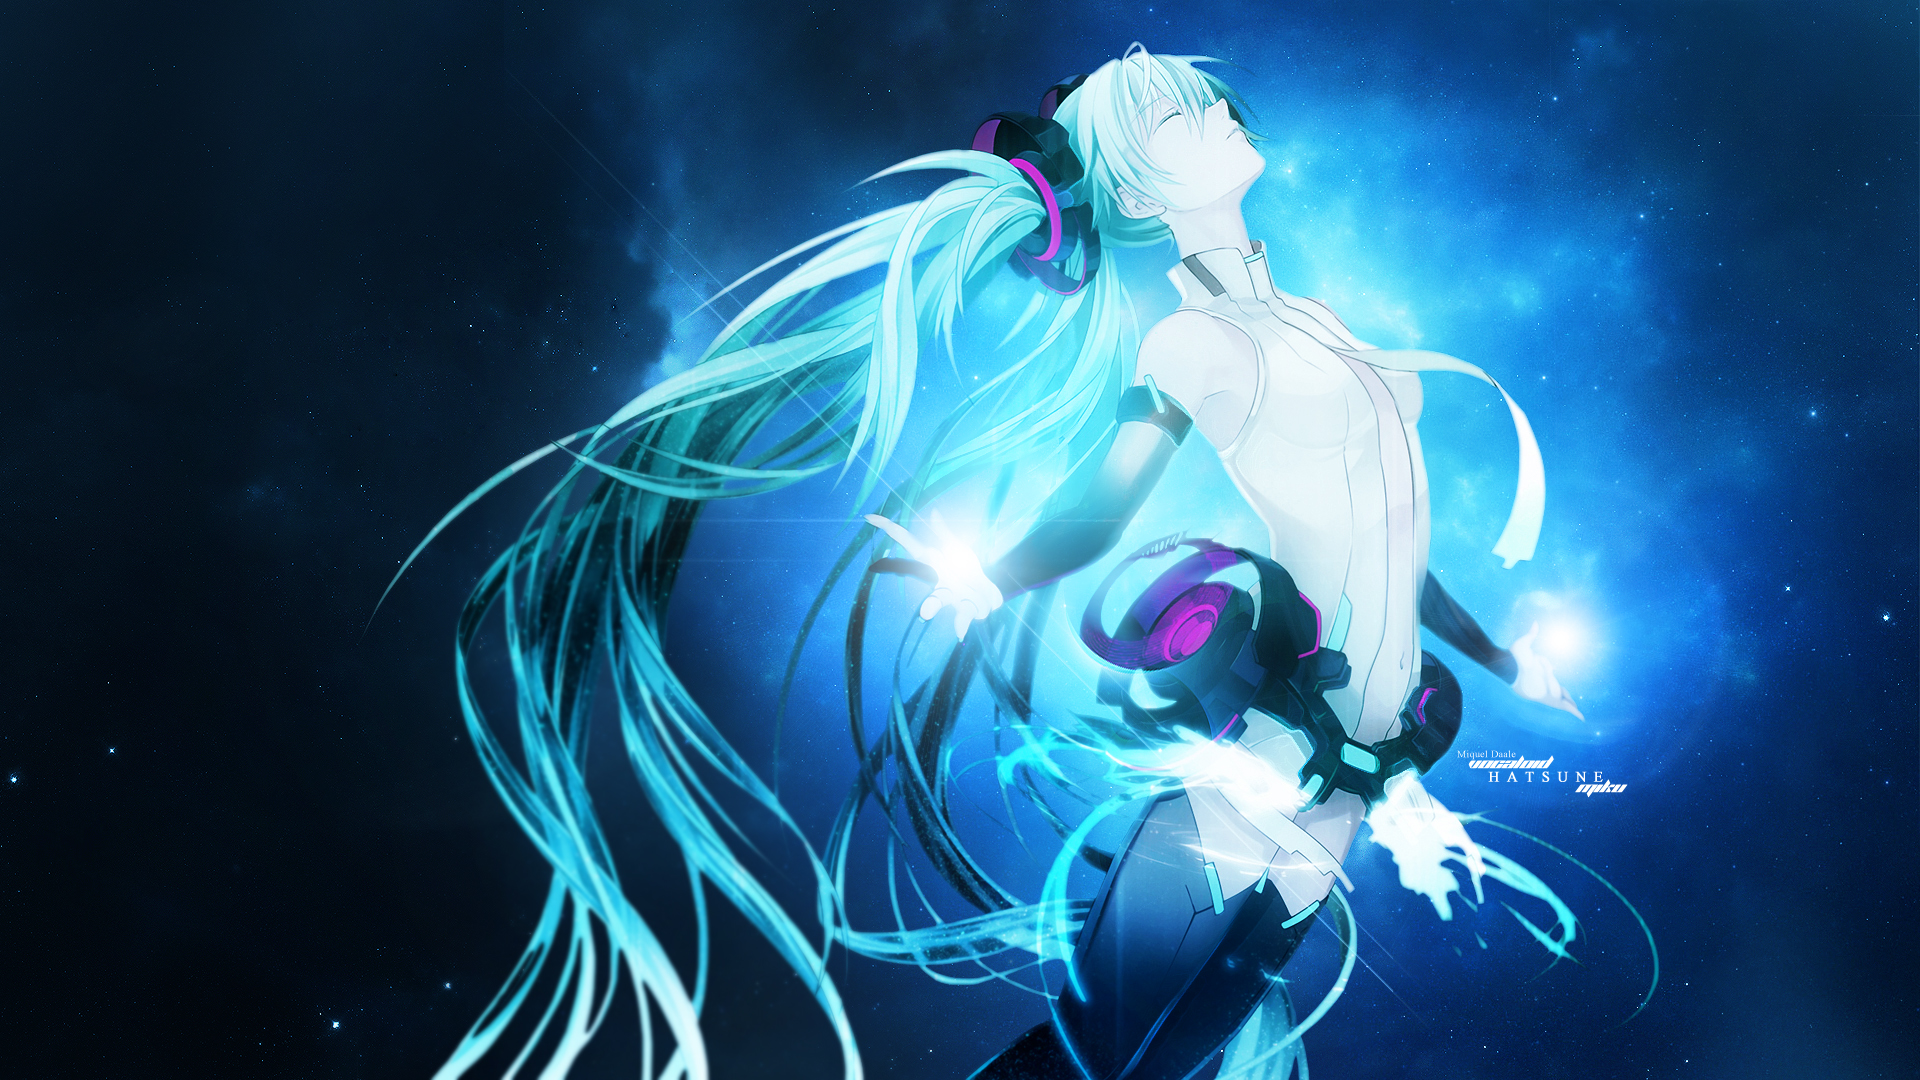 Vocaloid Hatsune Miku by Midway6 and resurgere